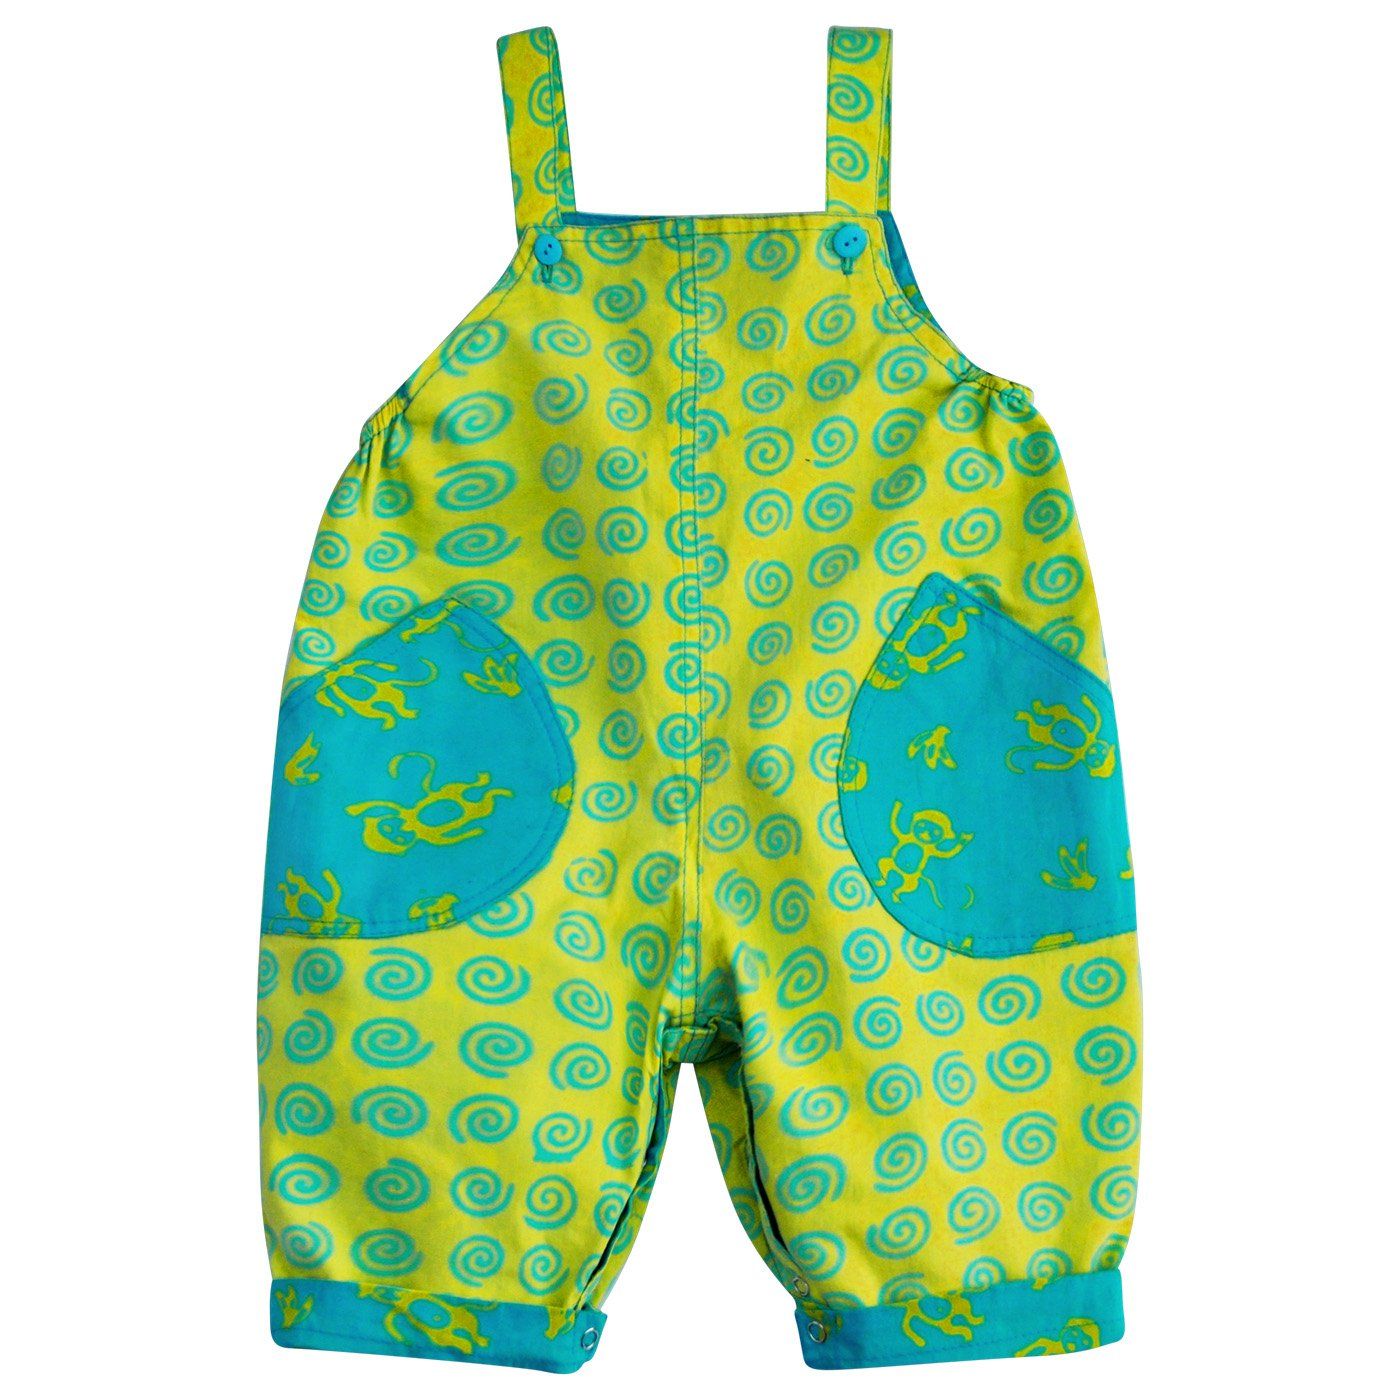 Baby Toddler Unisex Reversible Overall Jumpsuit - Love-Shu-Shi